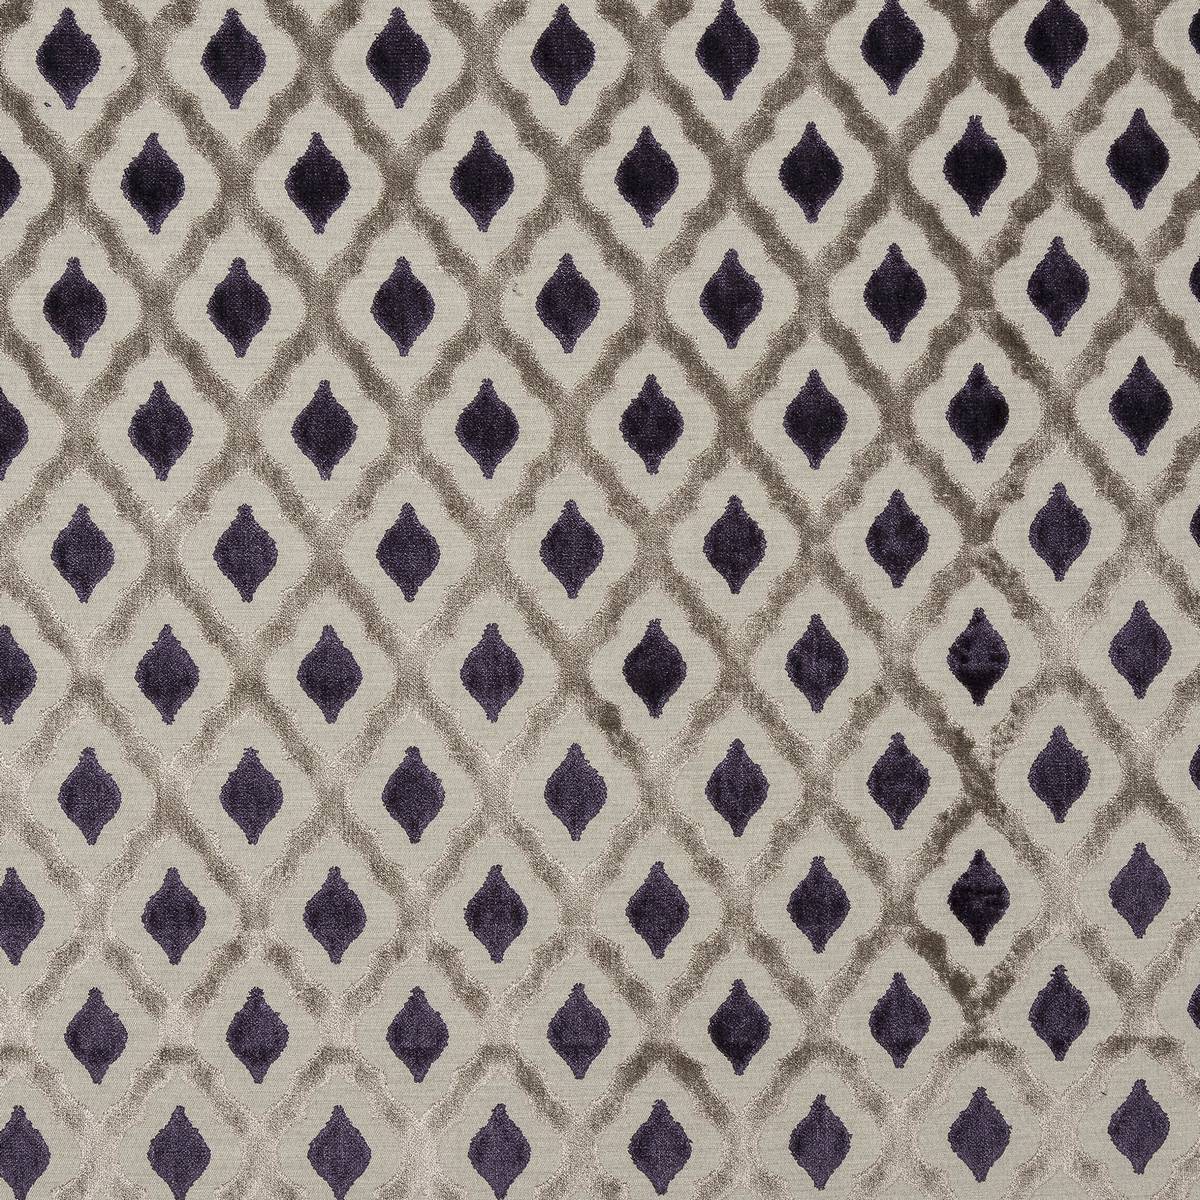 Assisi Aubergine Fabric by Porter & Stone